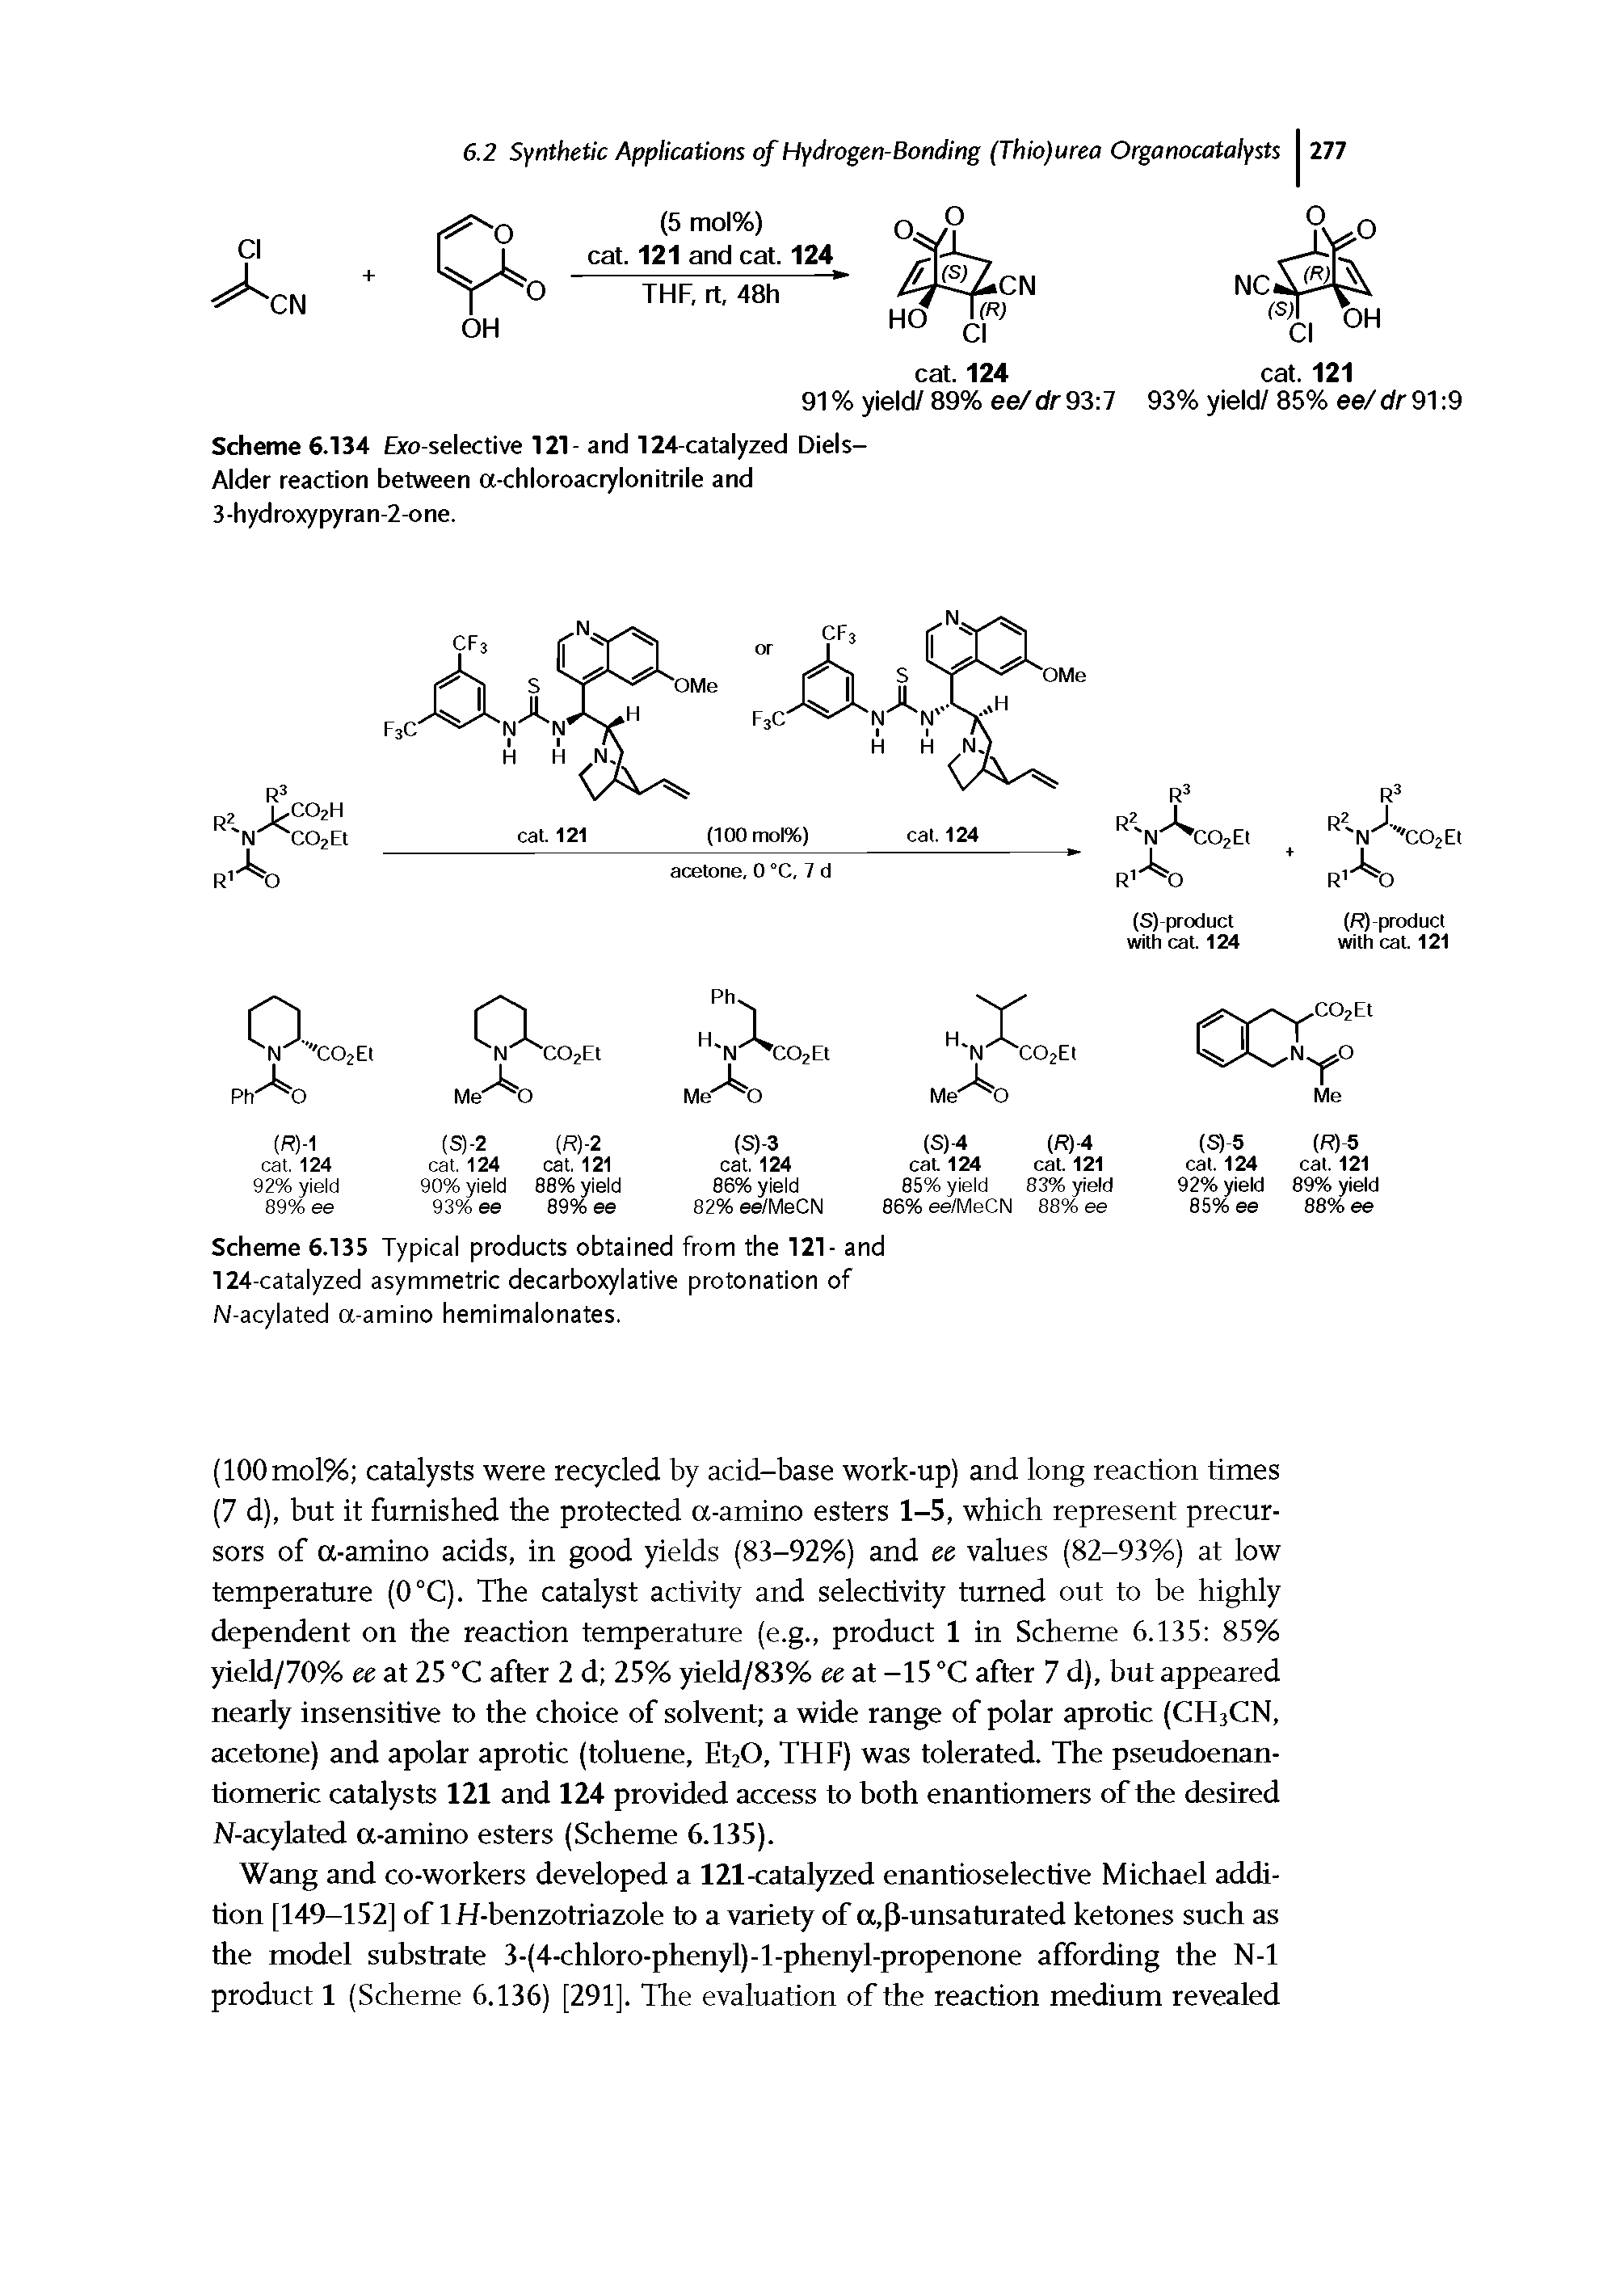 Scheme 6.135 Typical products obtained from the 121- and 124-catalyzed asymmetric decarboxylative protonation of N-acylated a-amino hemimalonates.